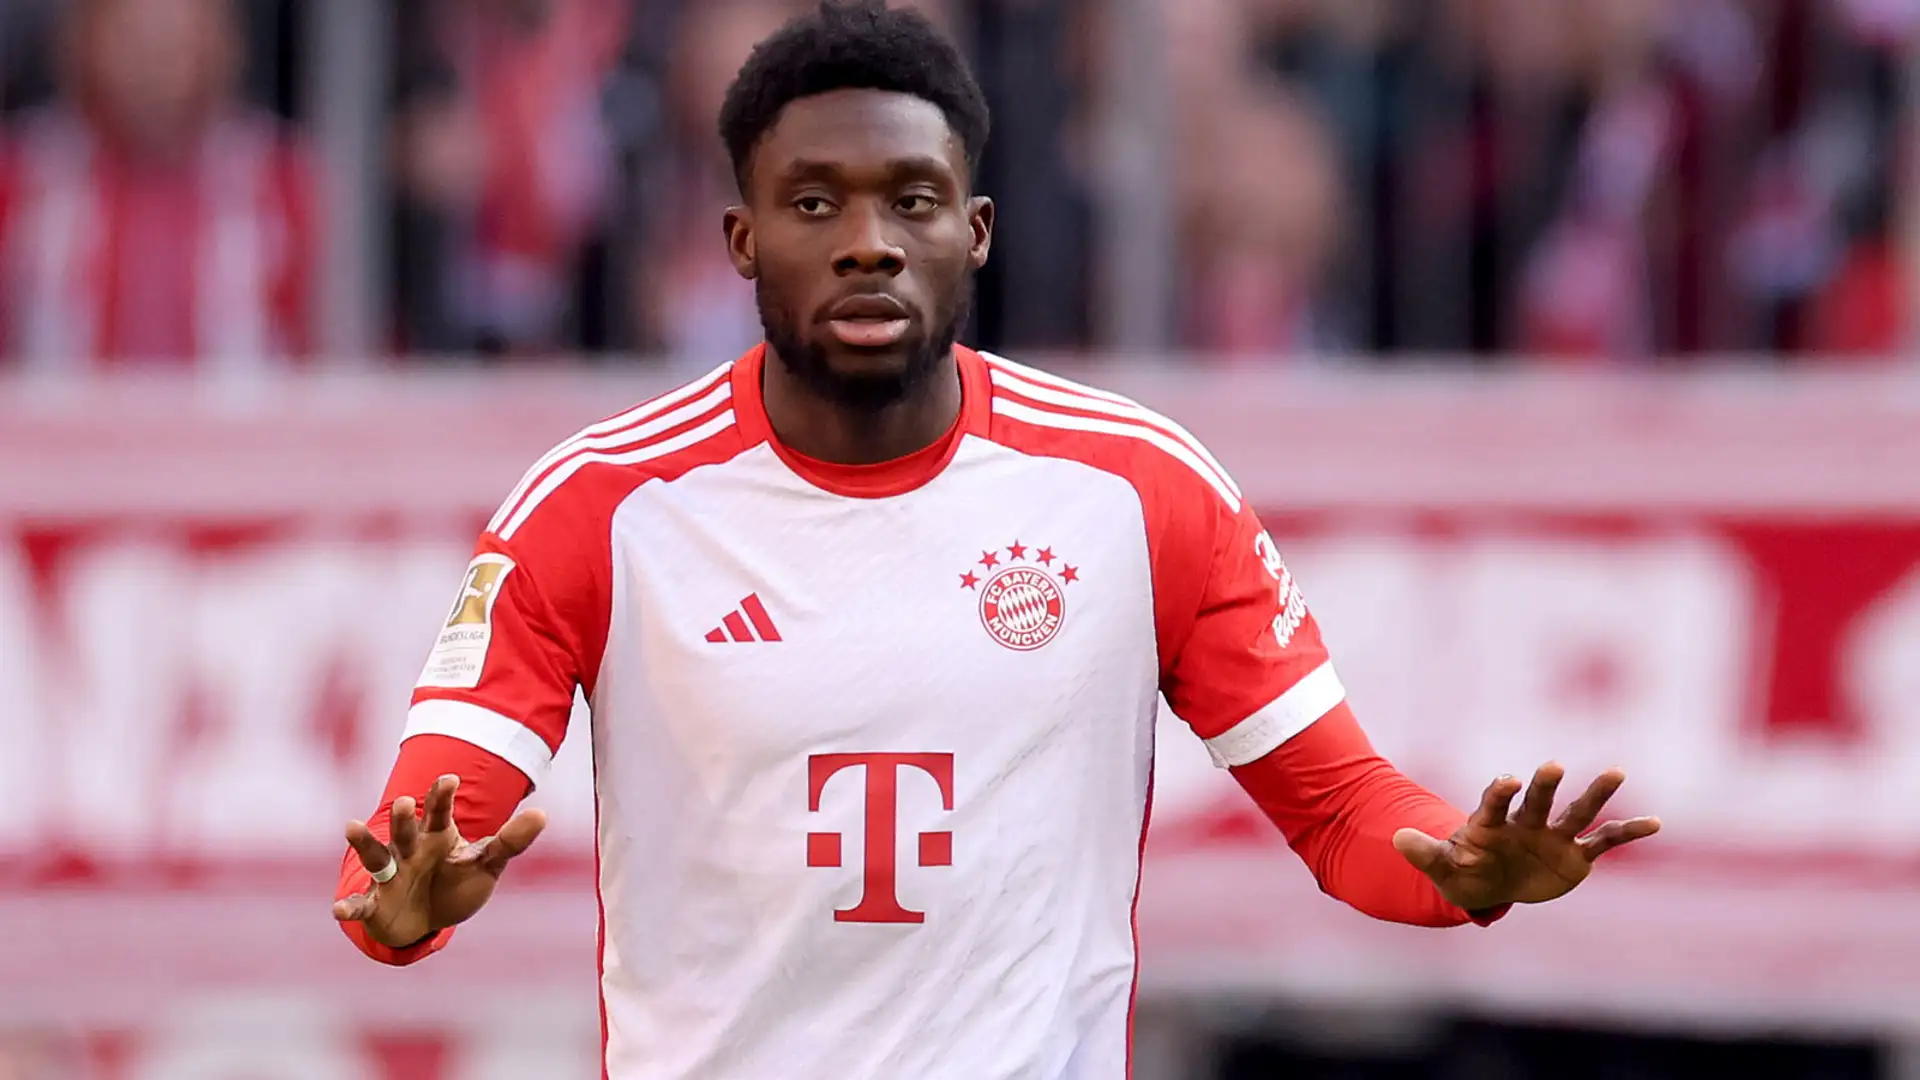 Have Bayern found Alphonso Davies' replacement? German giants in talks with €60m target as Canada star continues to toy with Real Madrid move